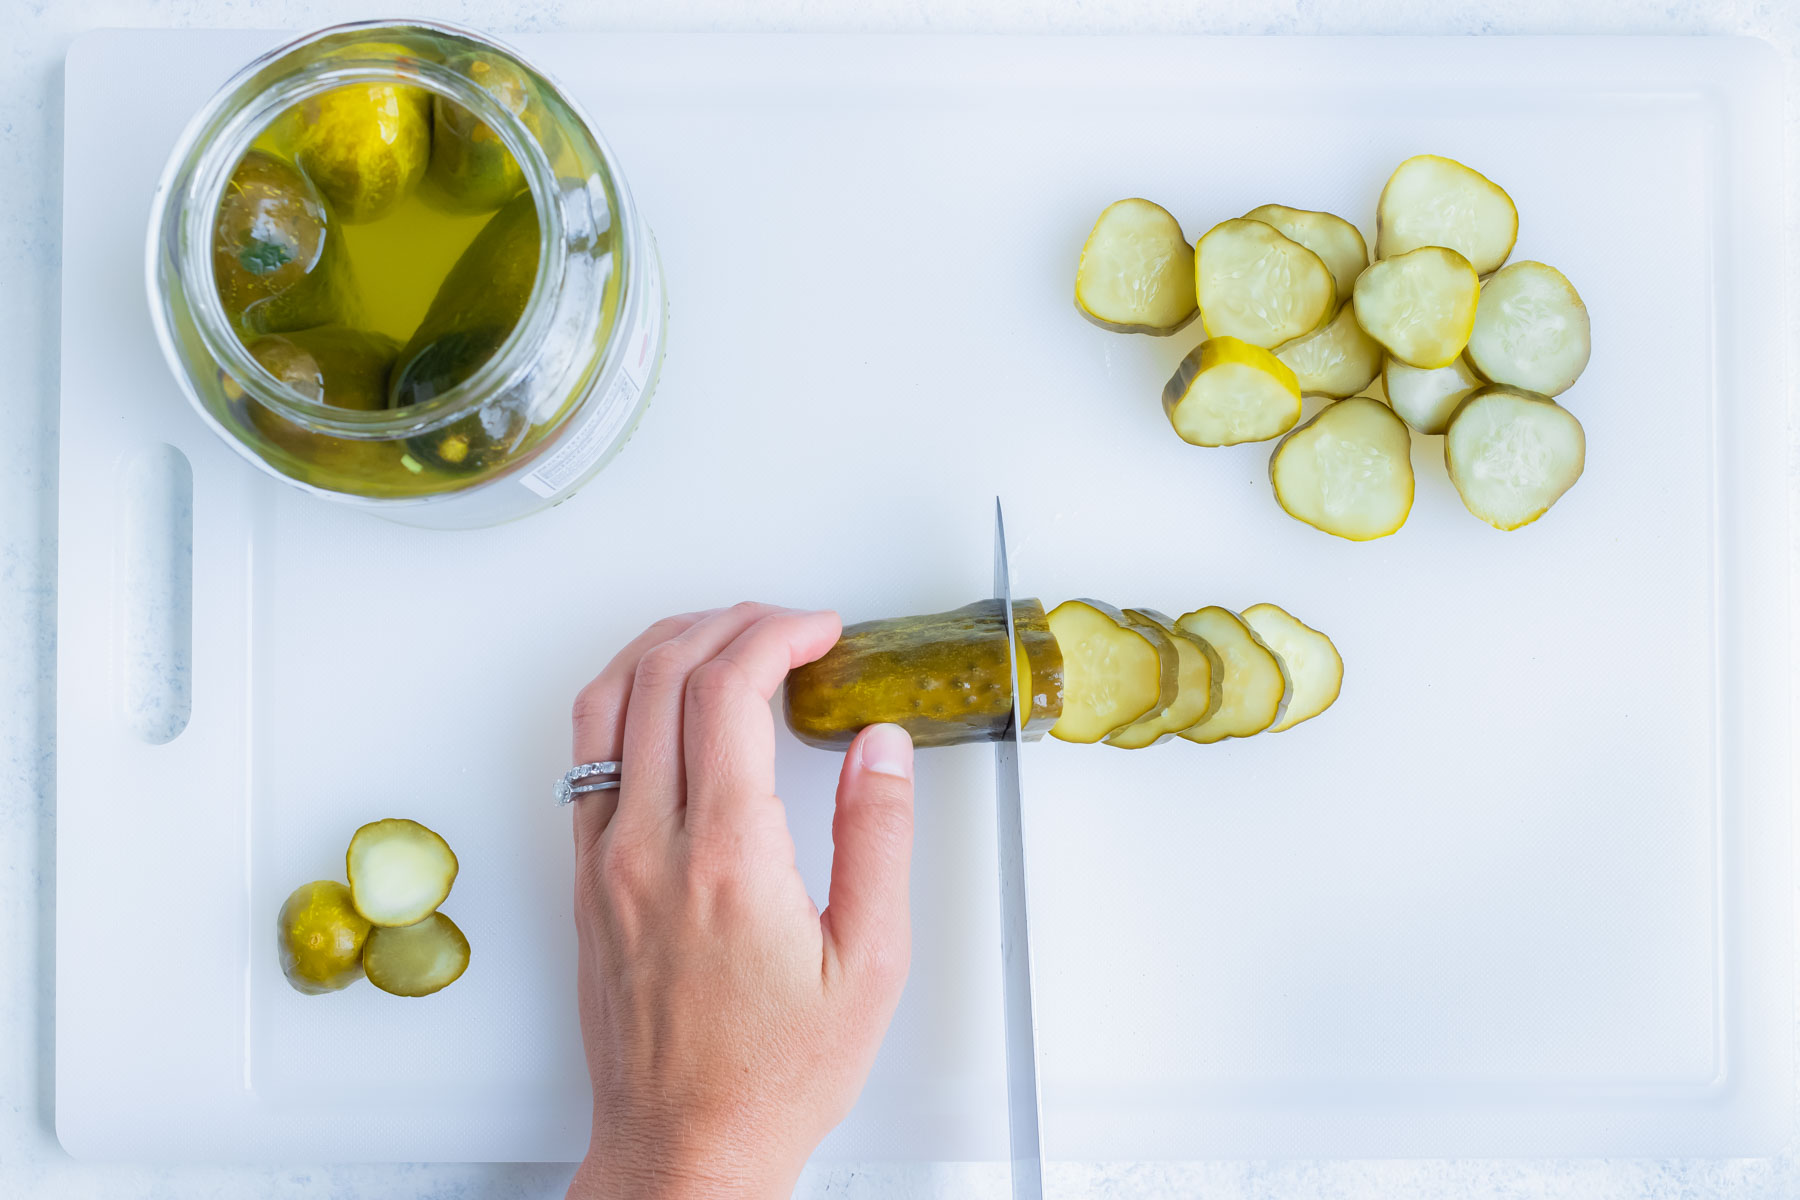 A dill pickle is sliced with a knife.